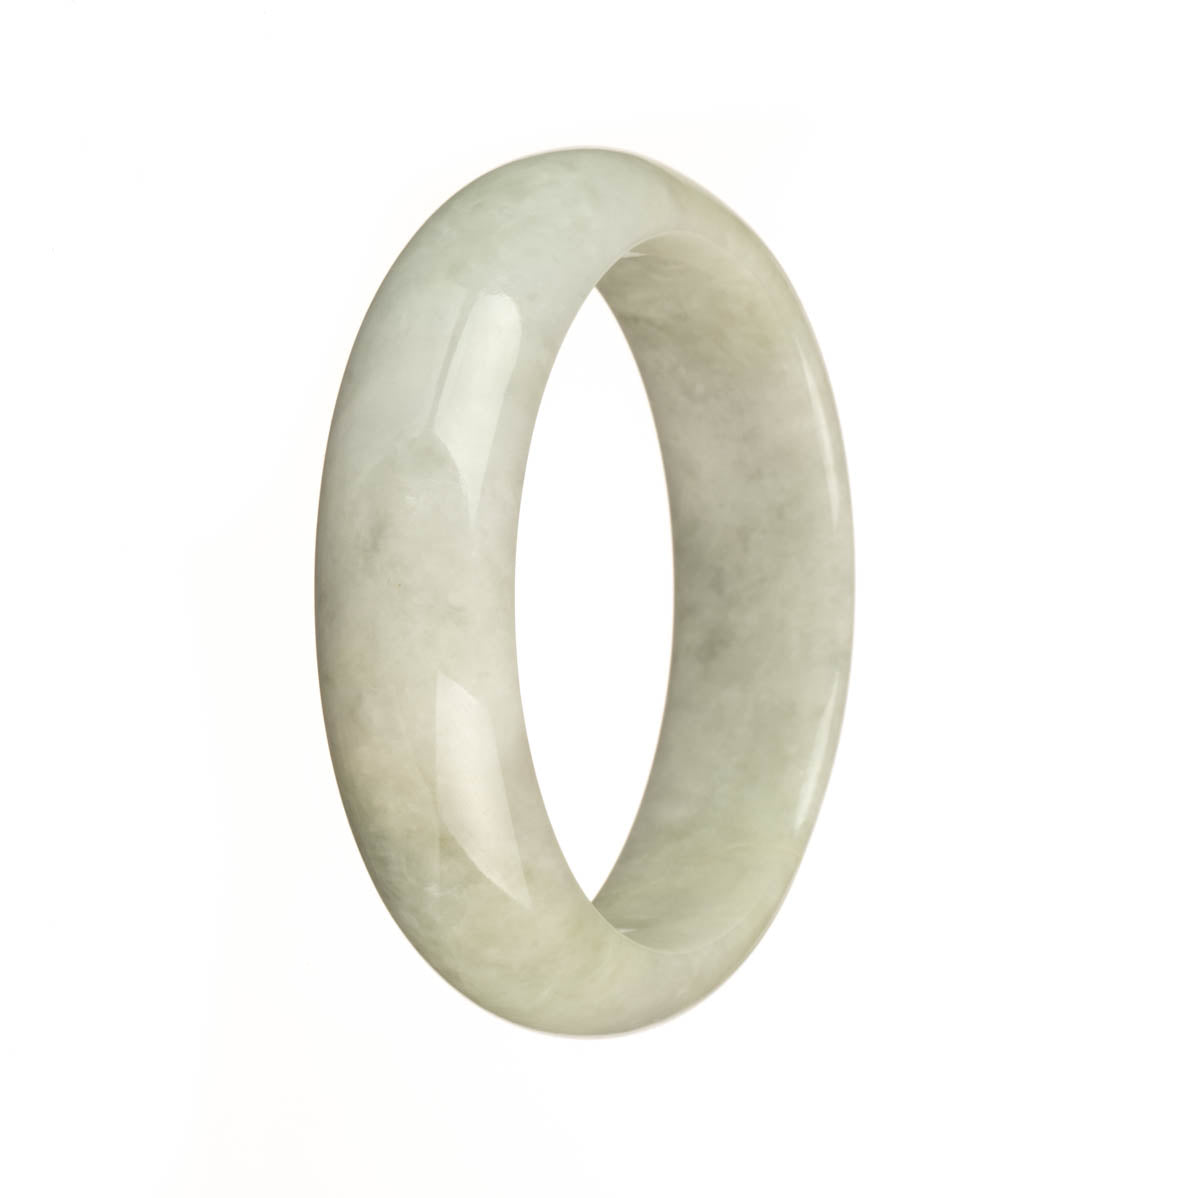 A close-up image of a genuine Grade A greyish green jadeite bangle with a 56mm half moon shape, showcasing its exquisite craftsmanship and MAYS™ brand authenticity.